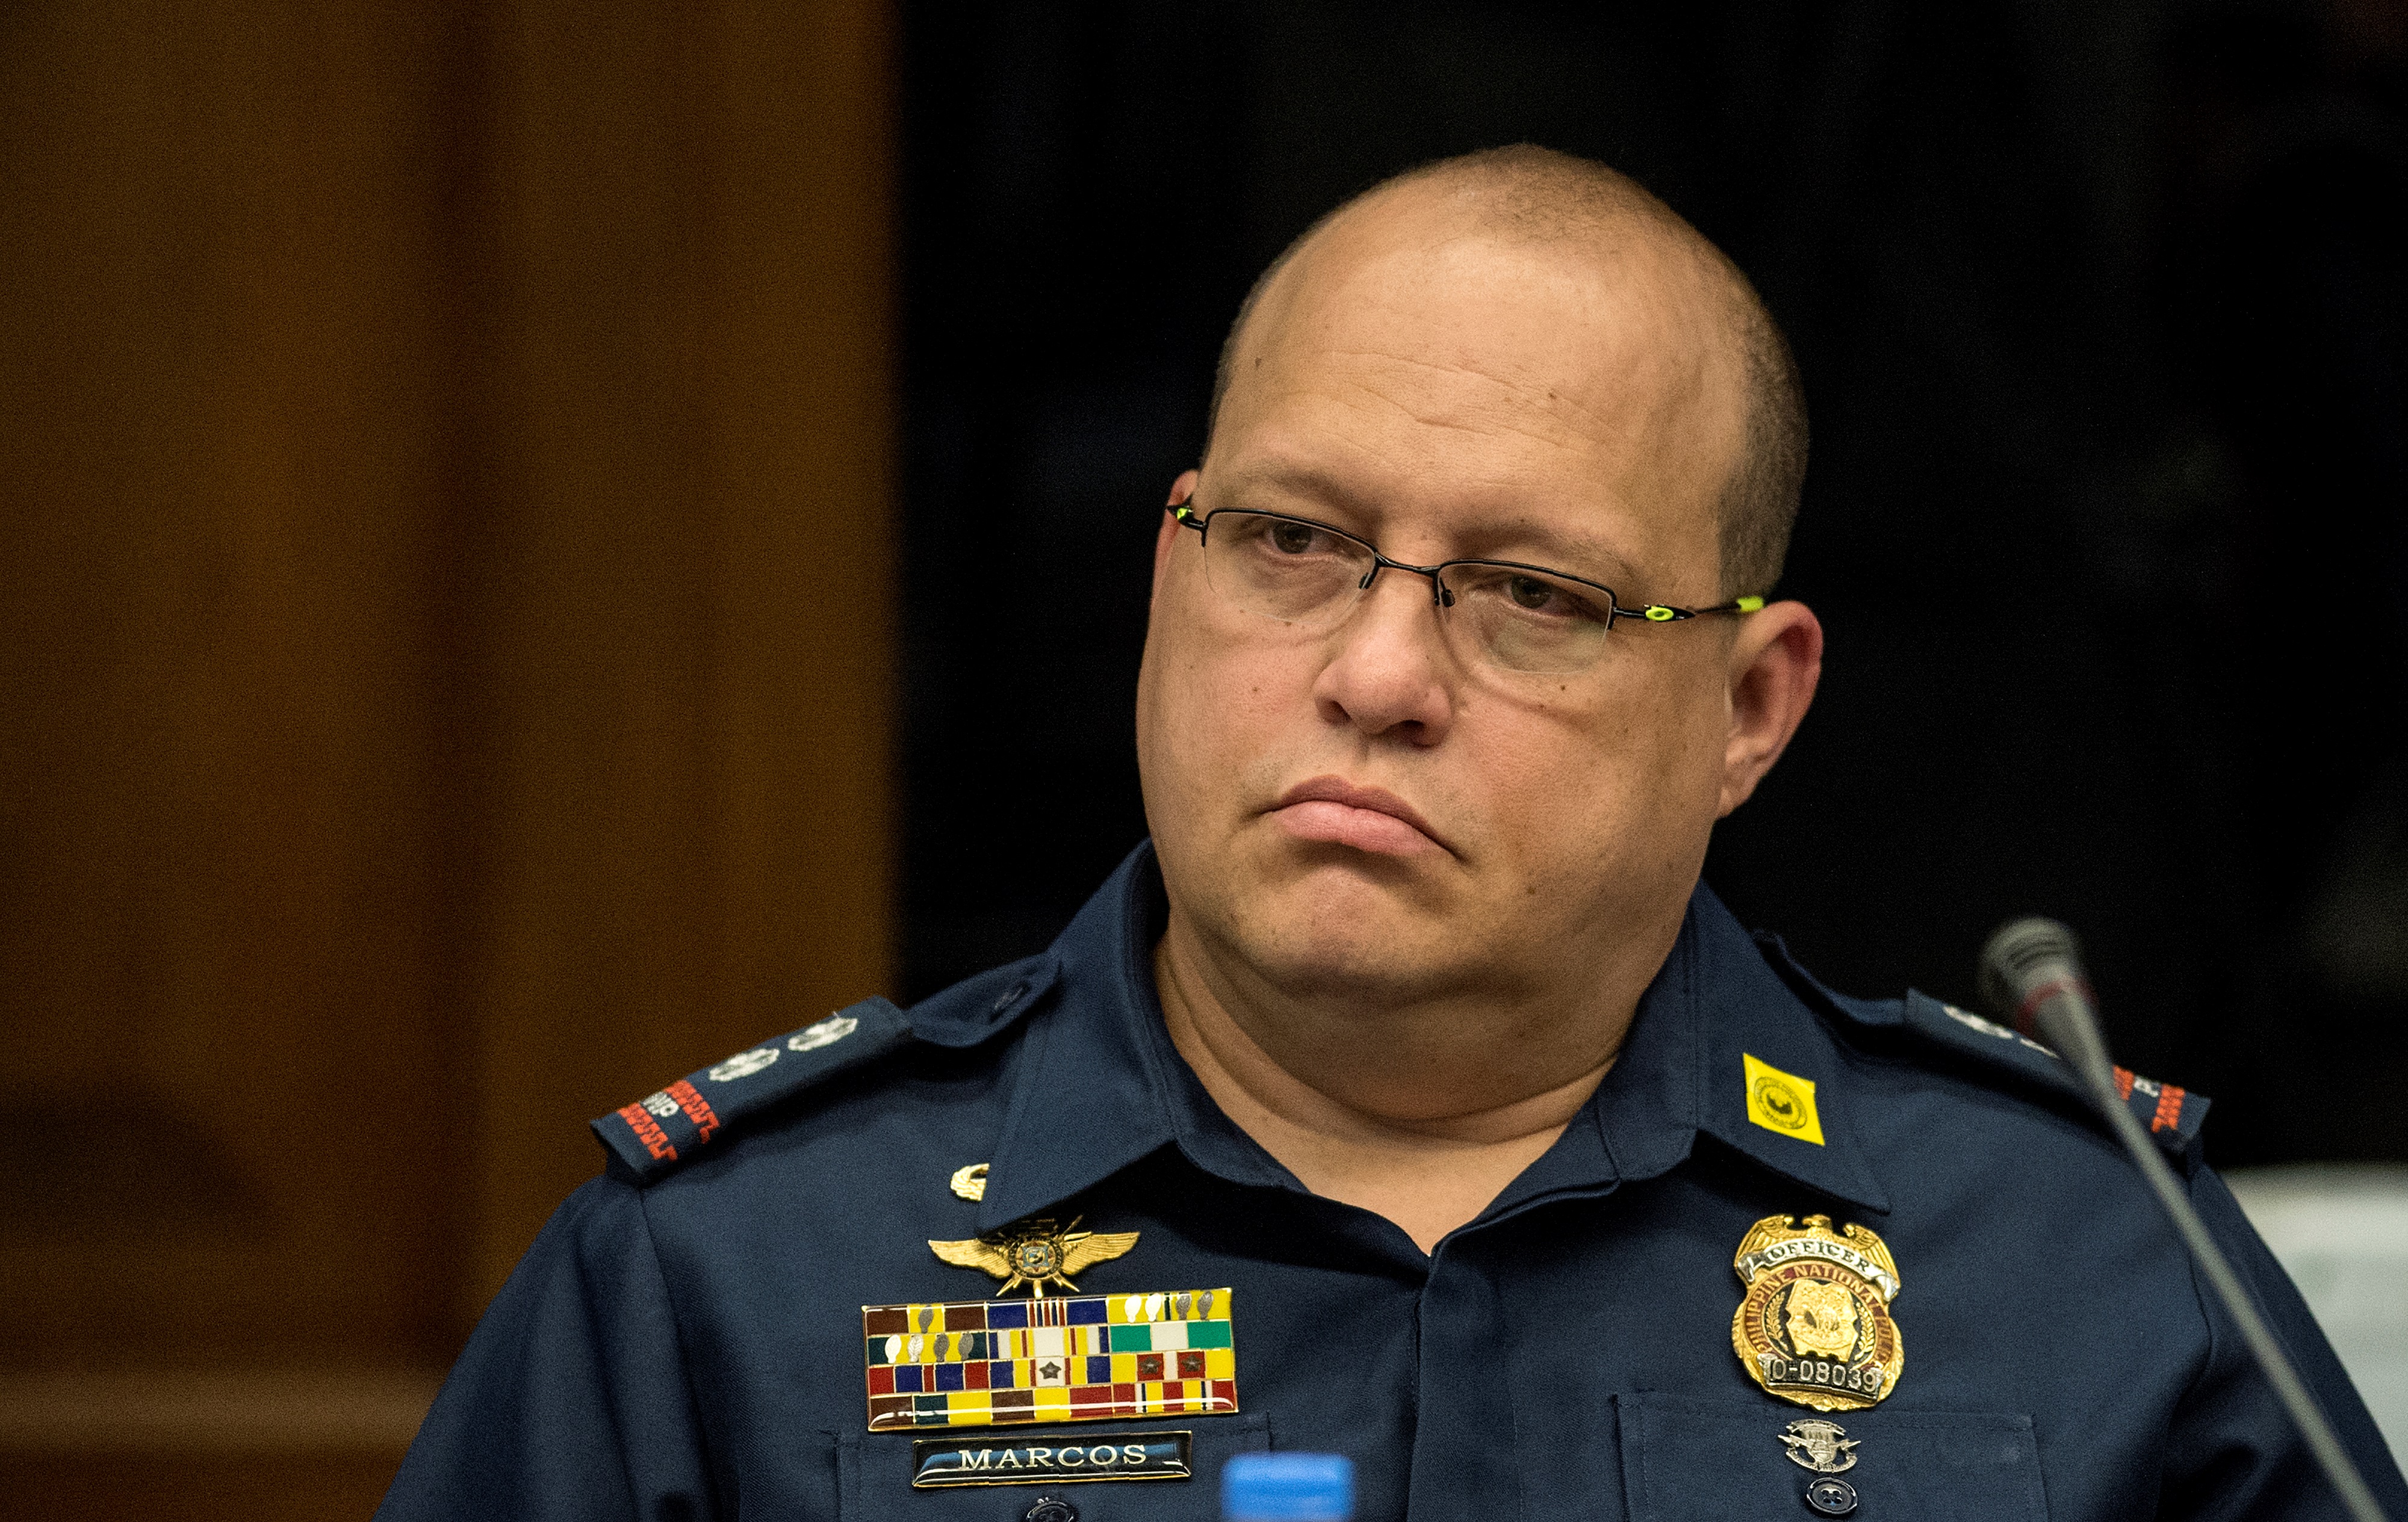 Criminal Investigation and Detection Group (CIDG) Superintendent Marvin Marcos, attends the Senate drug hearing at the Senate building in Manila on November 23, 2016. Kerwin was arrested in the United Arab Emirates last month and will face drug trafficking charges. / AFP PHOTO / NOEL CELIS